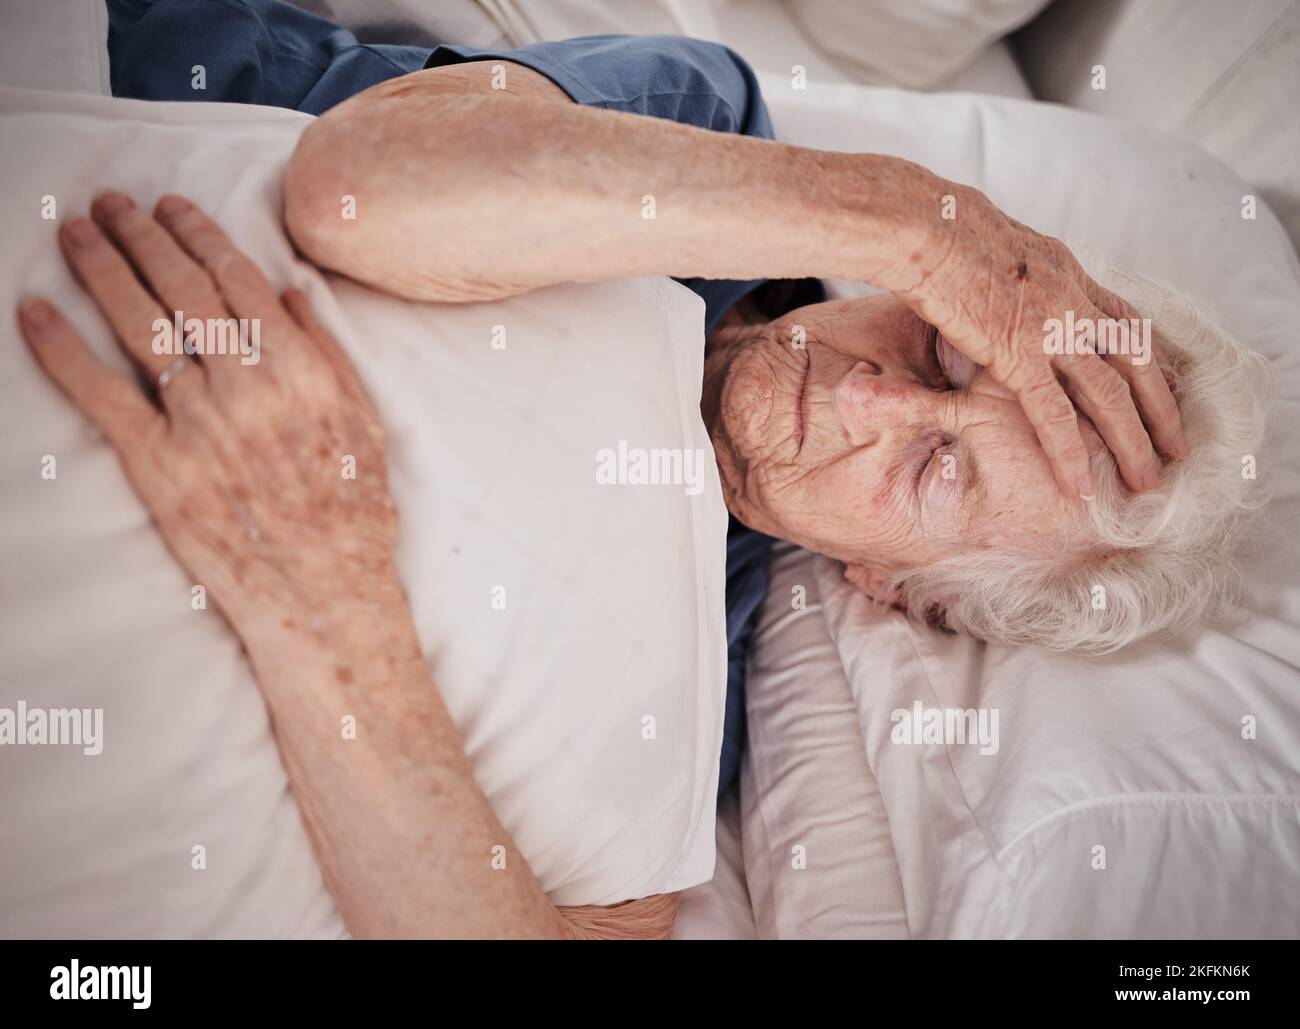 Headache, pain and senior woman in bed for trauma recovery, rehabilitation or rest in elderly care nursing home. Healthcare problem, medical emergency Stock Photo